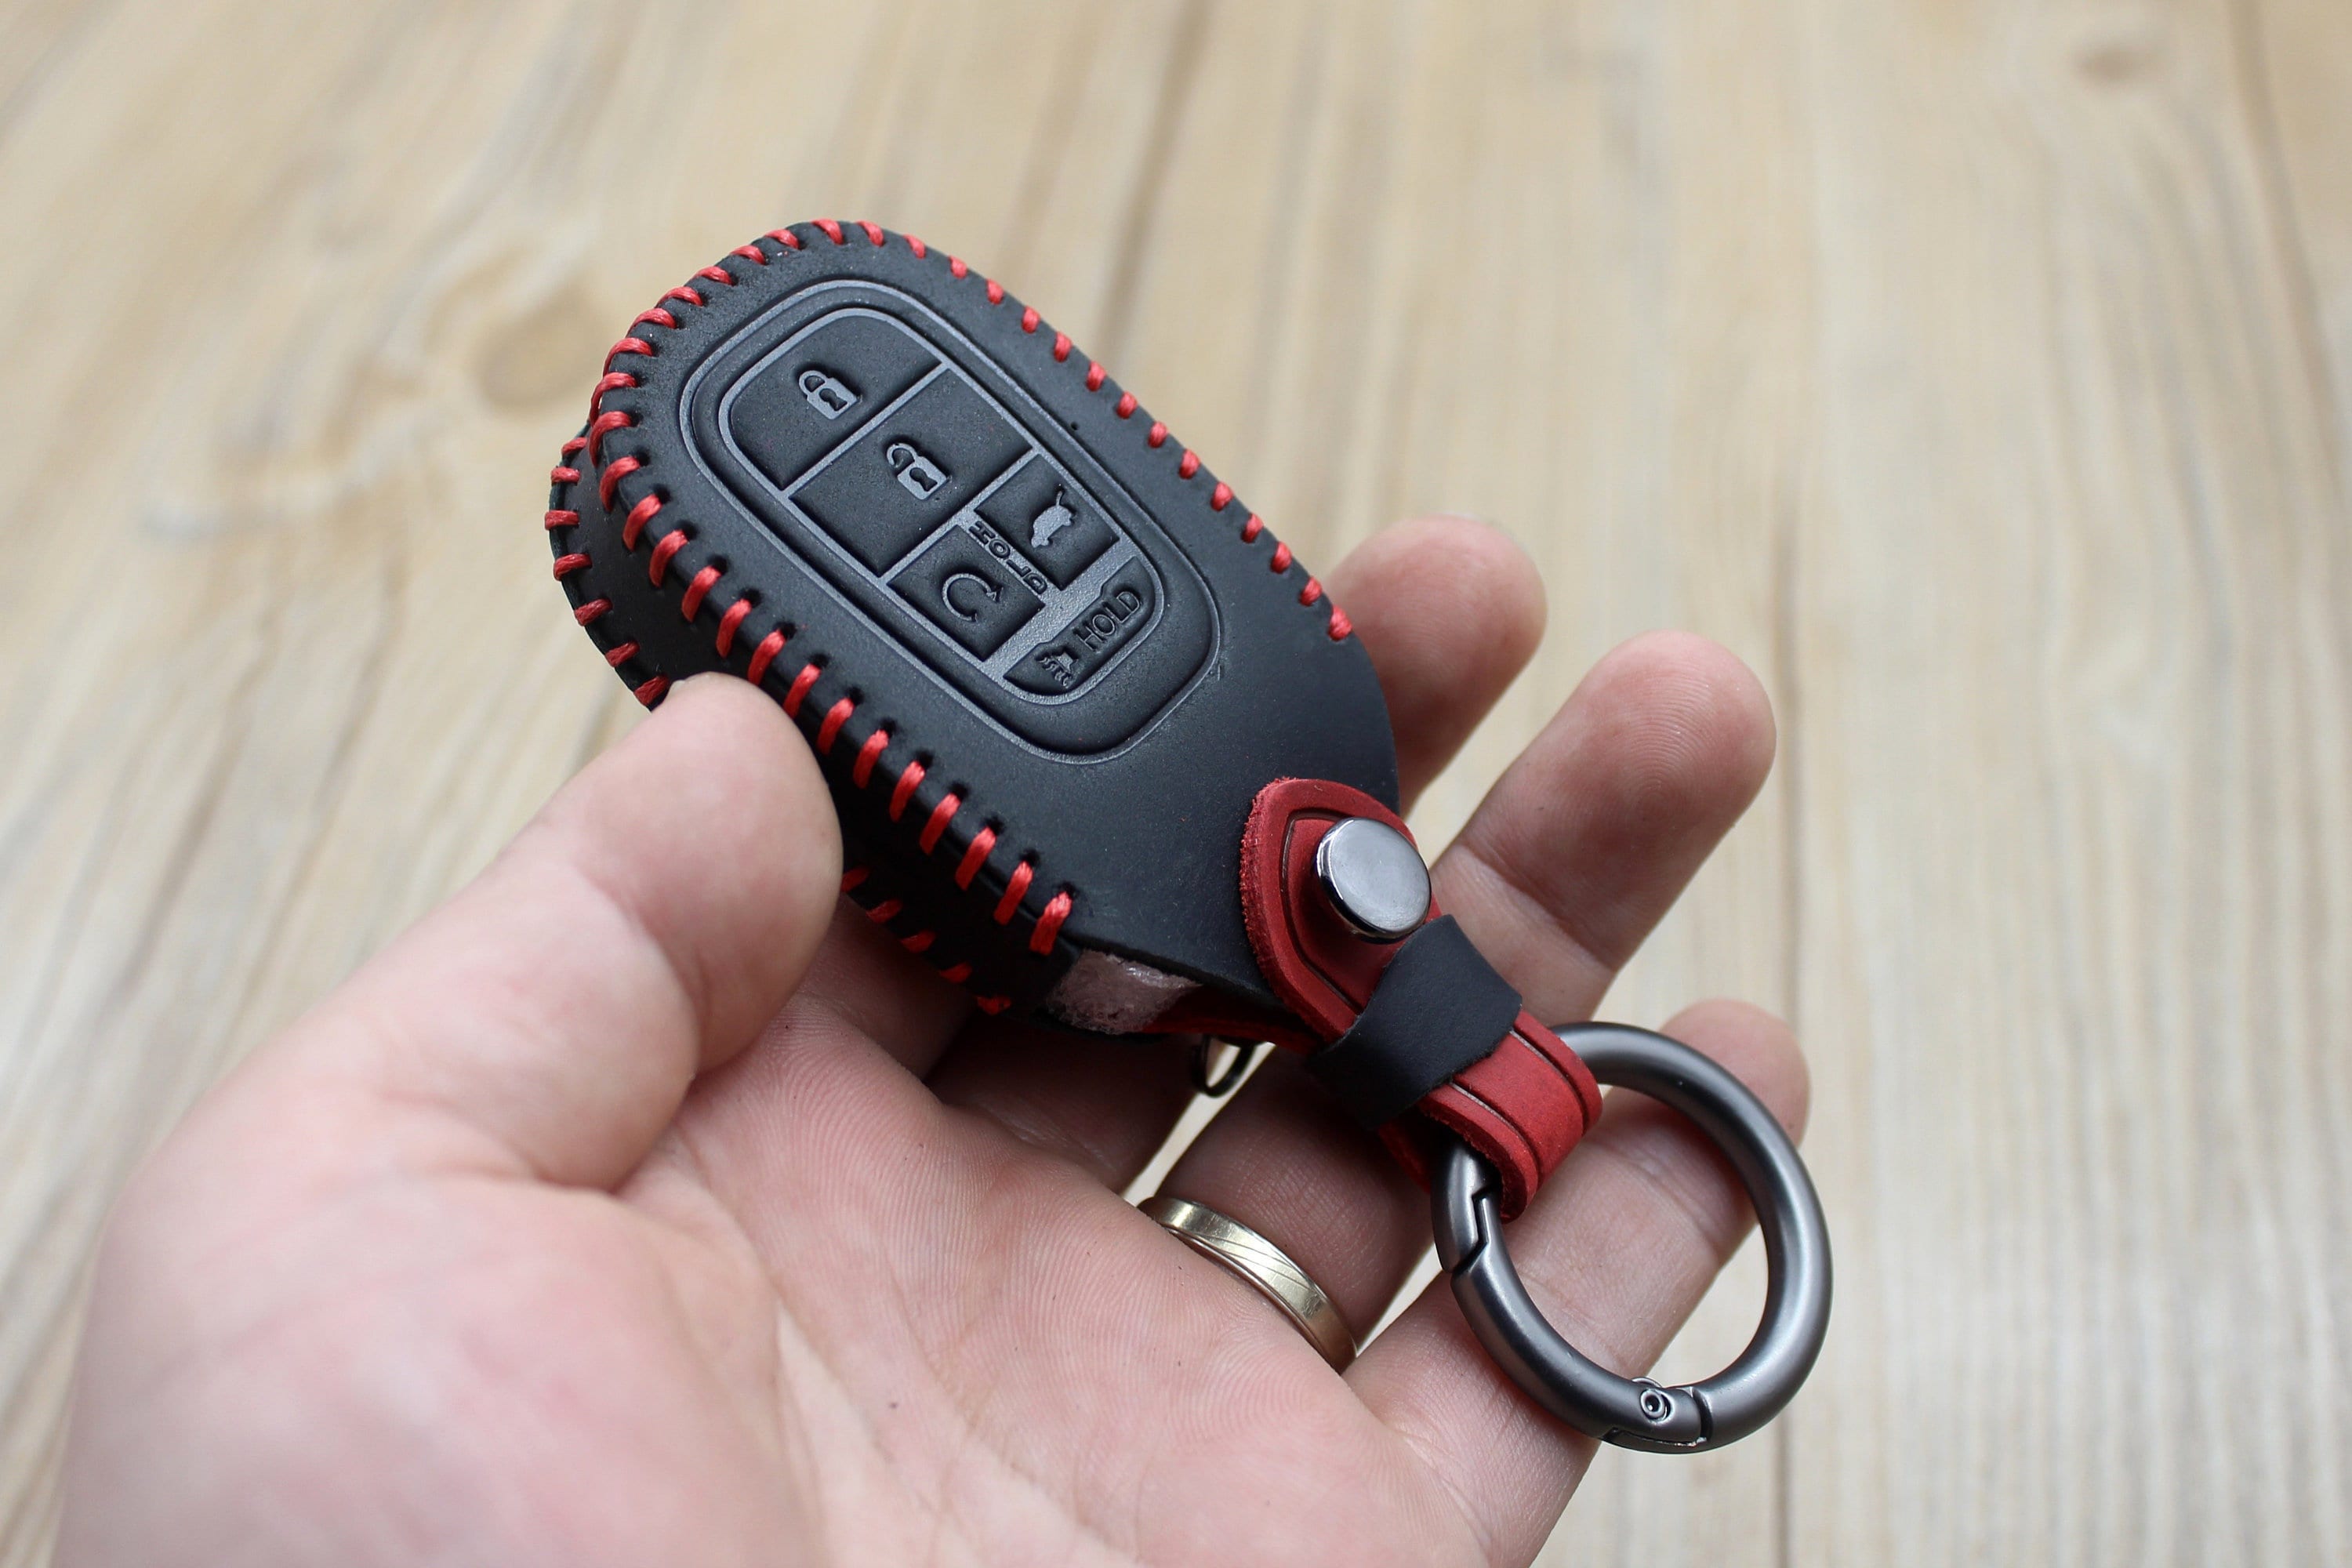 Corelife Universal Car Key Holder and Keychain, Vehicle Remote Key Fob Smart Key Protector Case